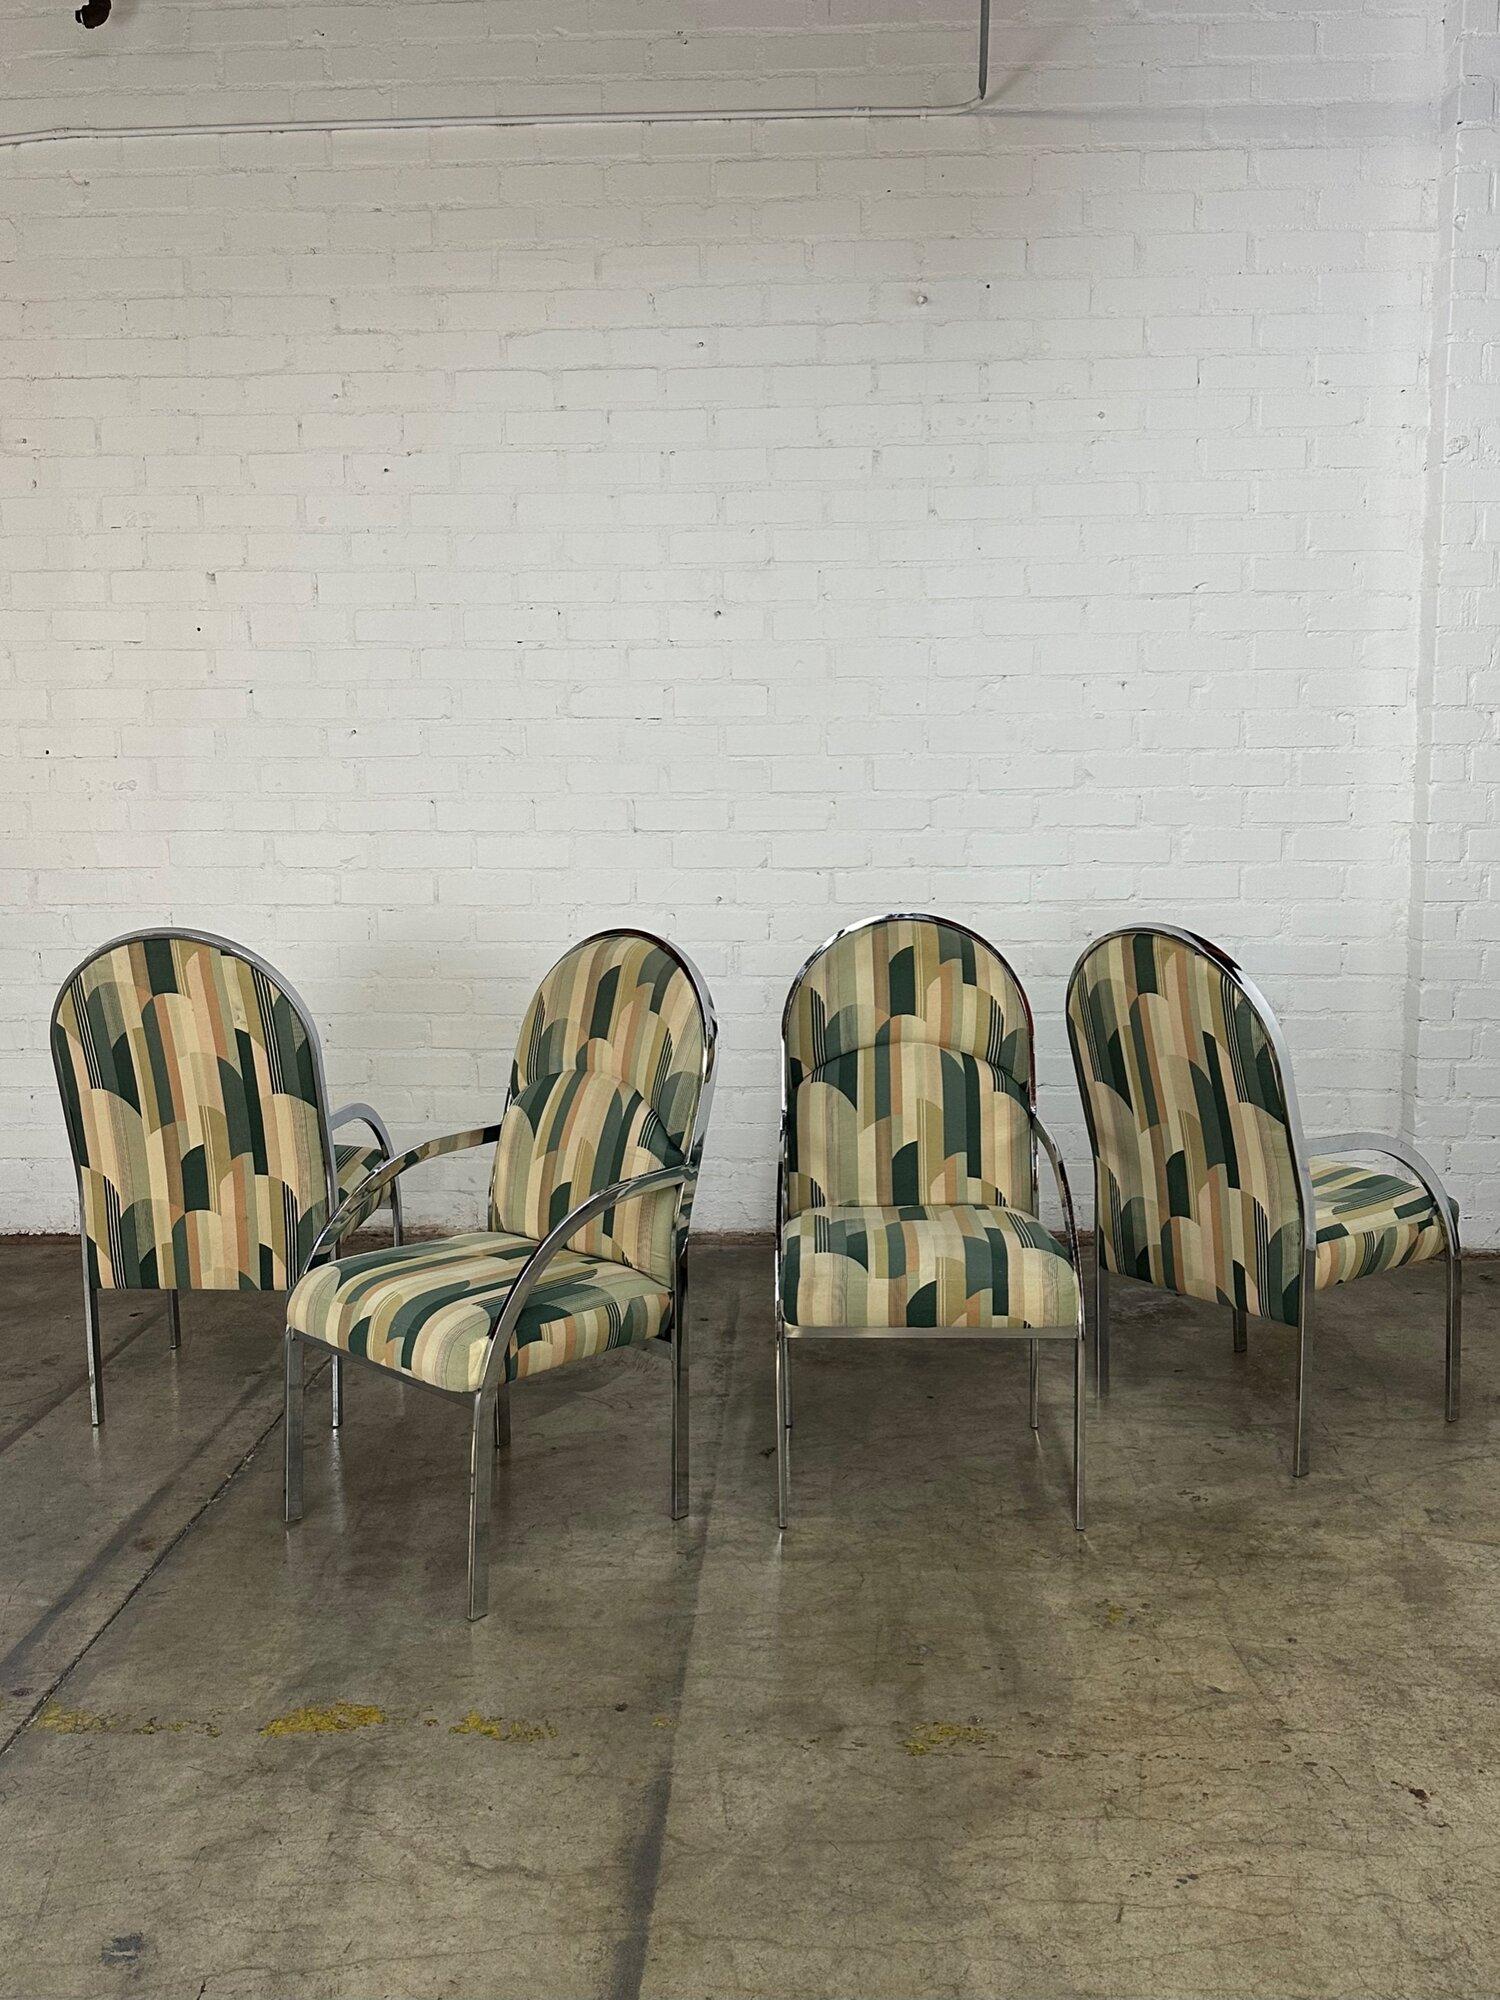 W22 D22 H40 SW19 SD17 SH18 AH25

Set of 4 Chrome Dining Chairs, in great vintage condition. Chairs are structurally sound and have no rips or tears. Upholstery features an art deco like pattern in shades of green and salmon.
Price is for the set of